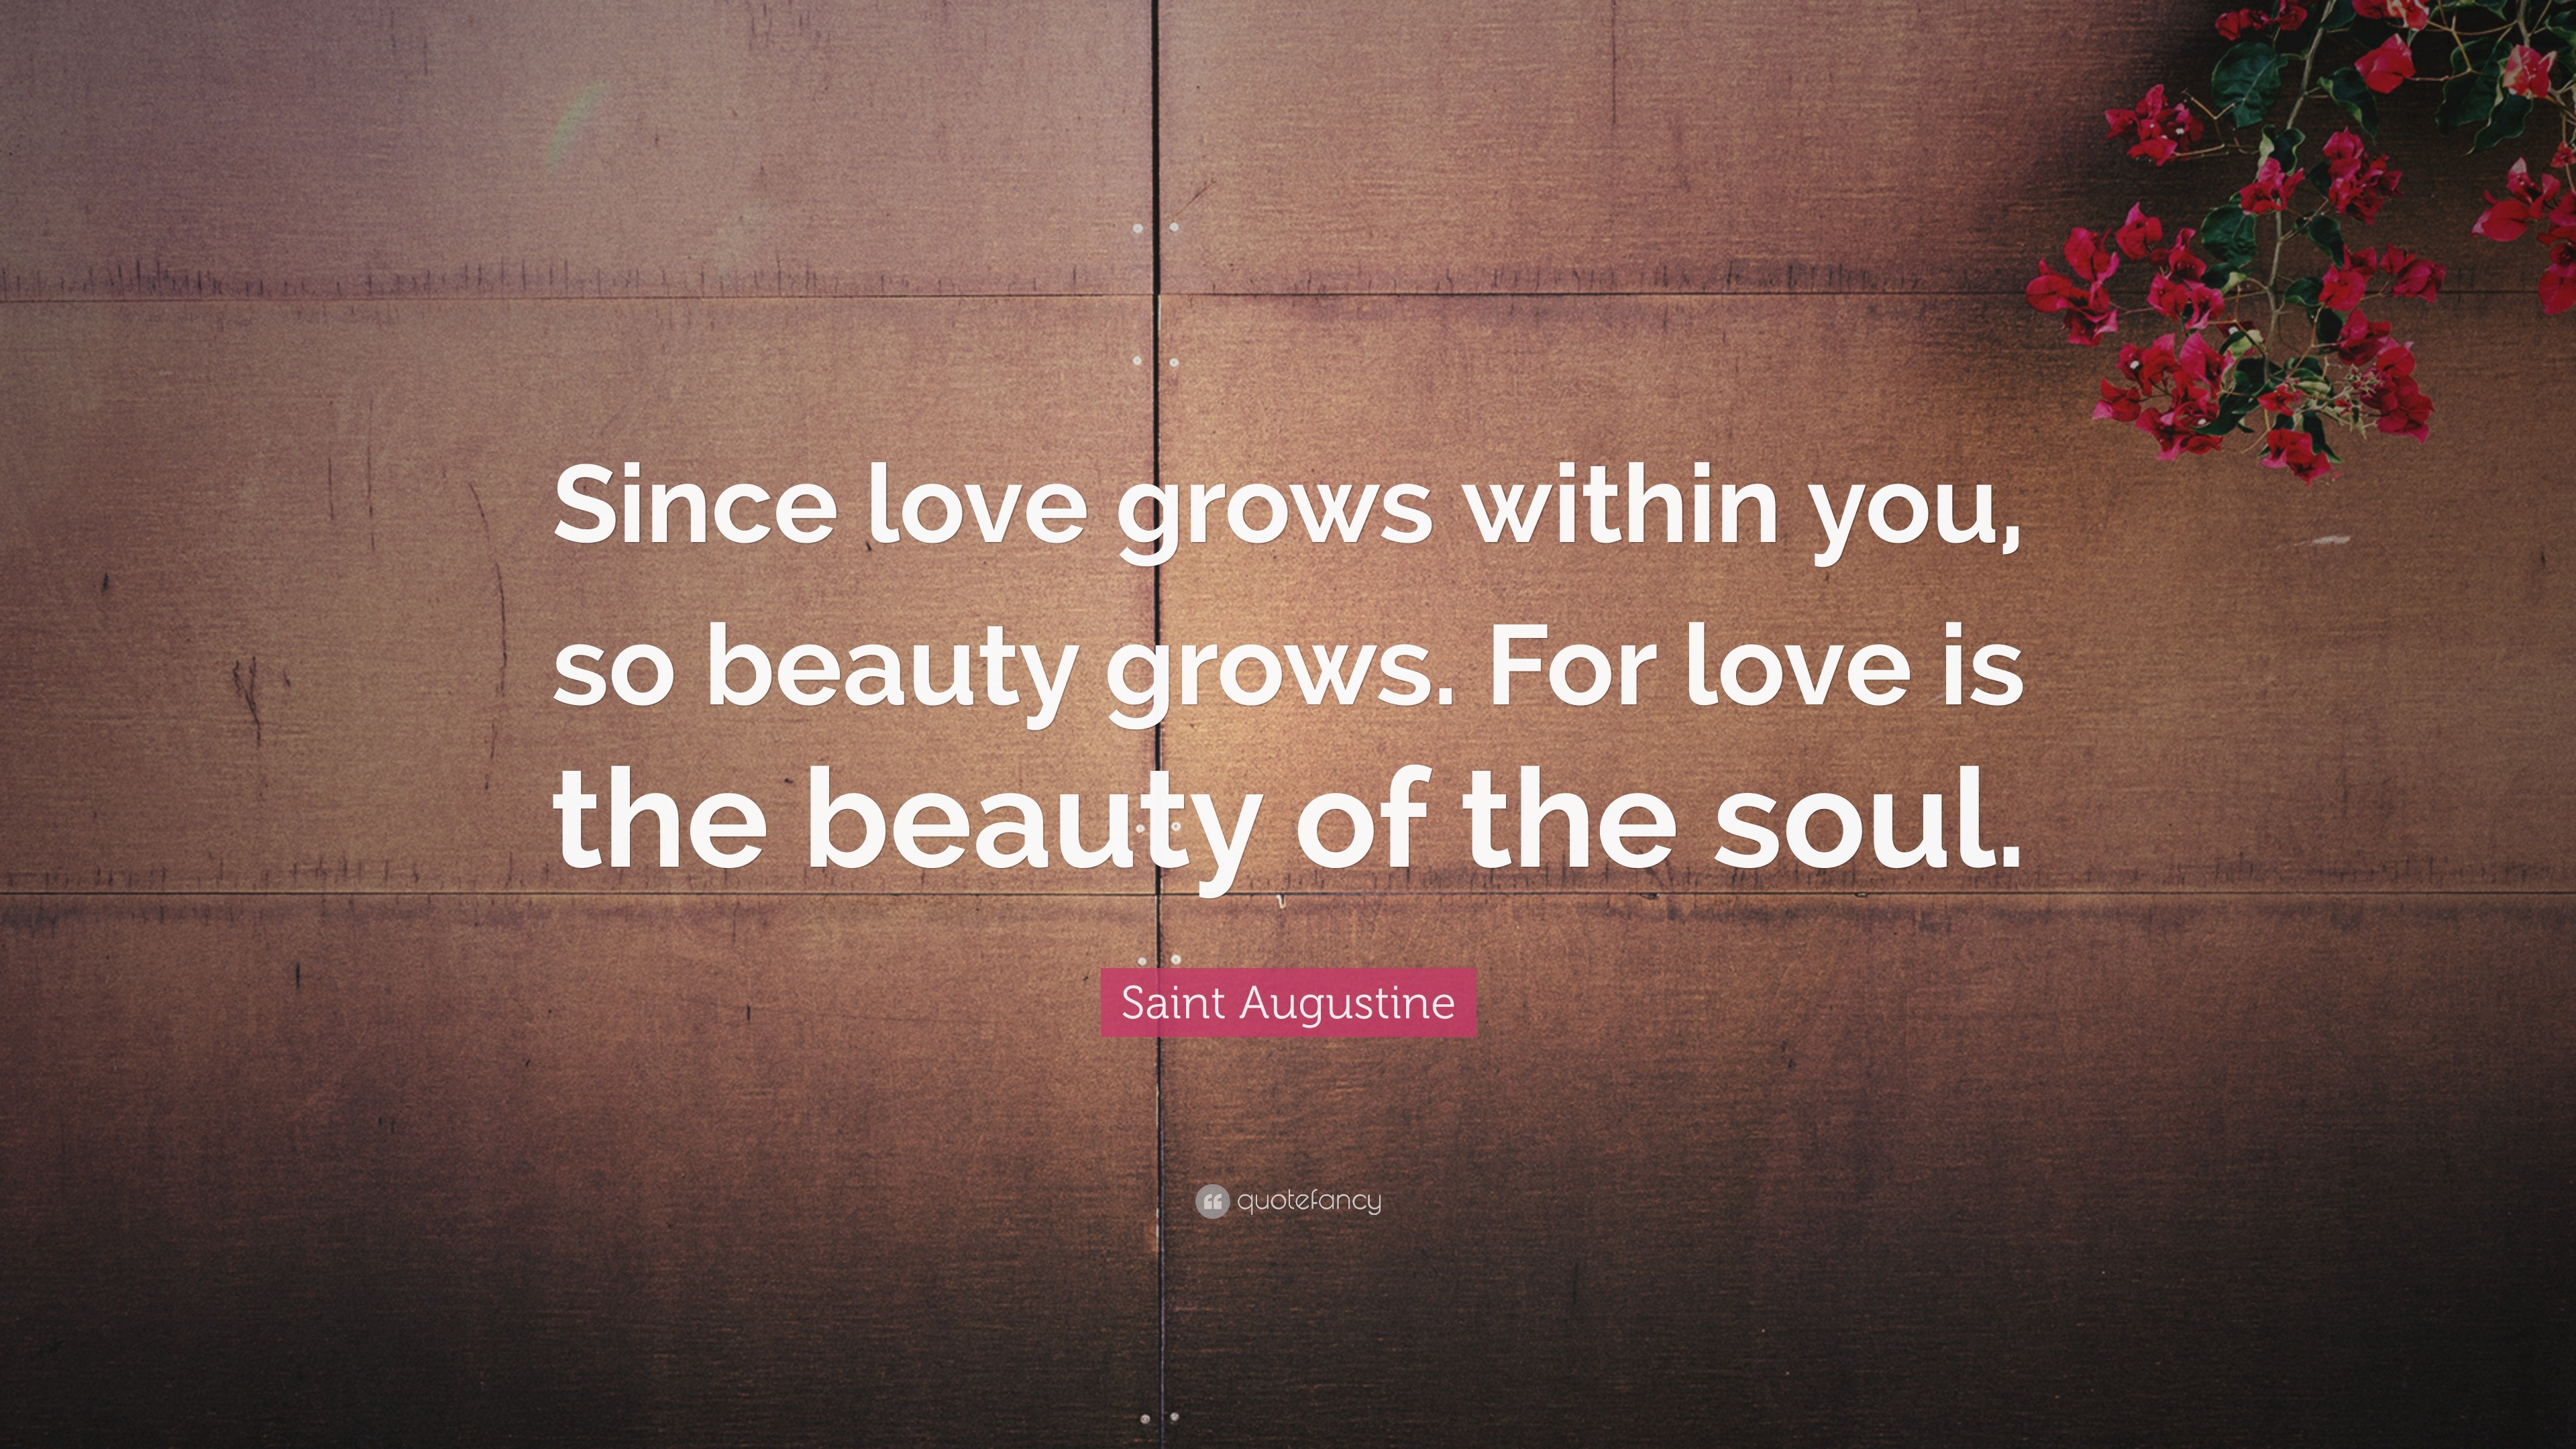 Saint Augustine Quote: “Since love grows within you, so beauty grows